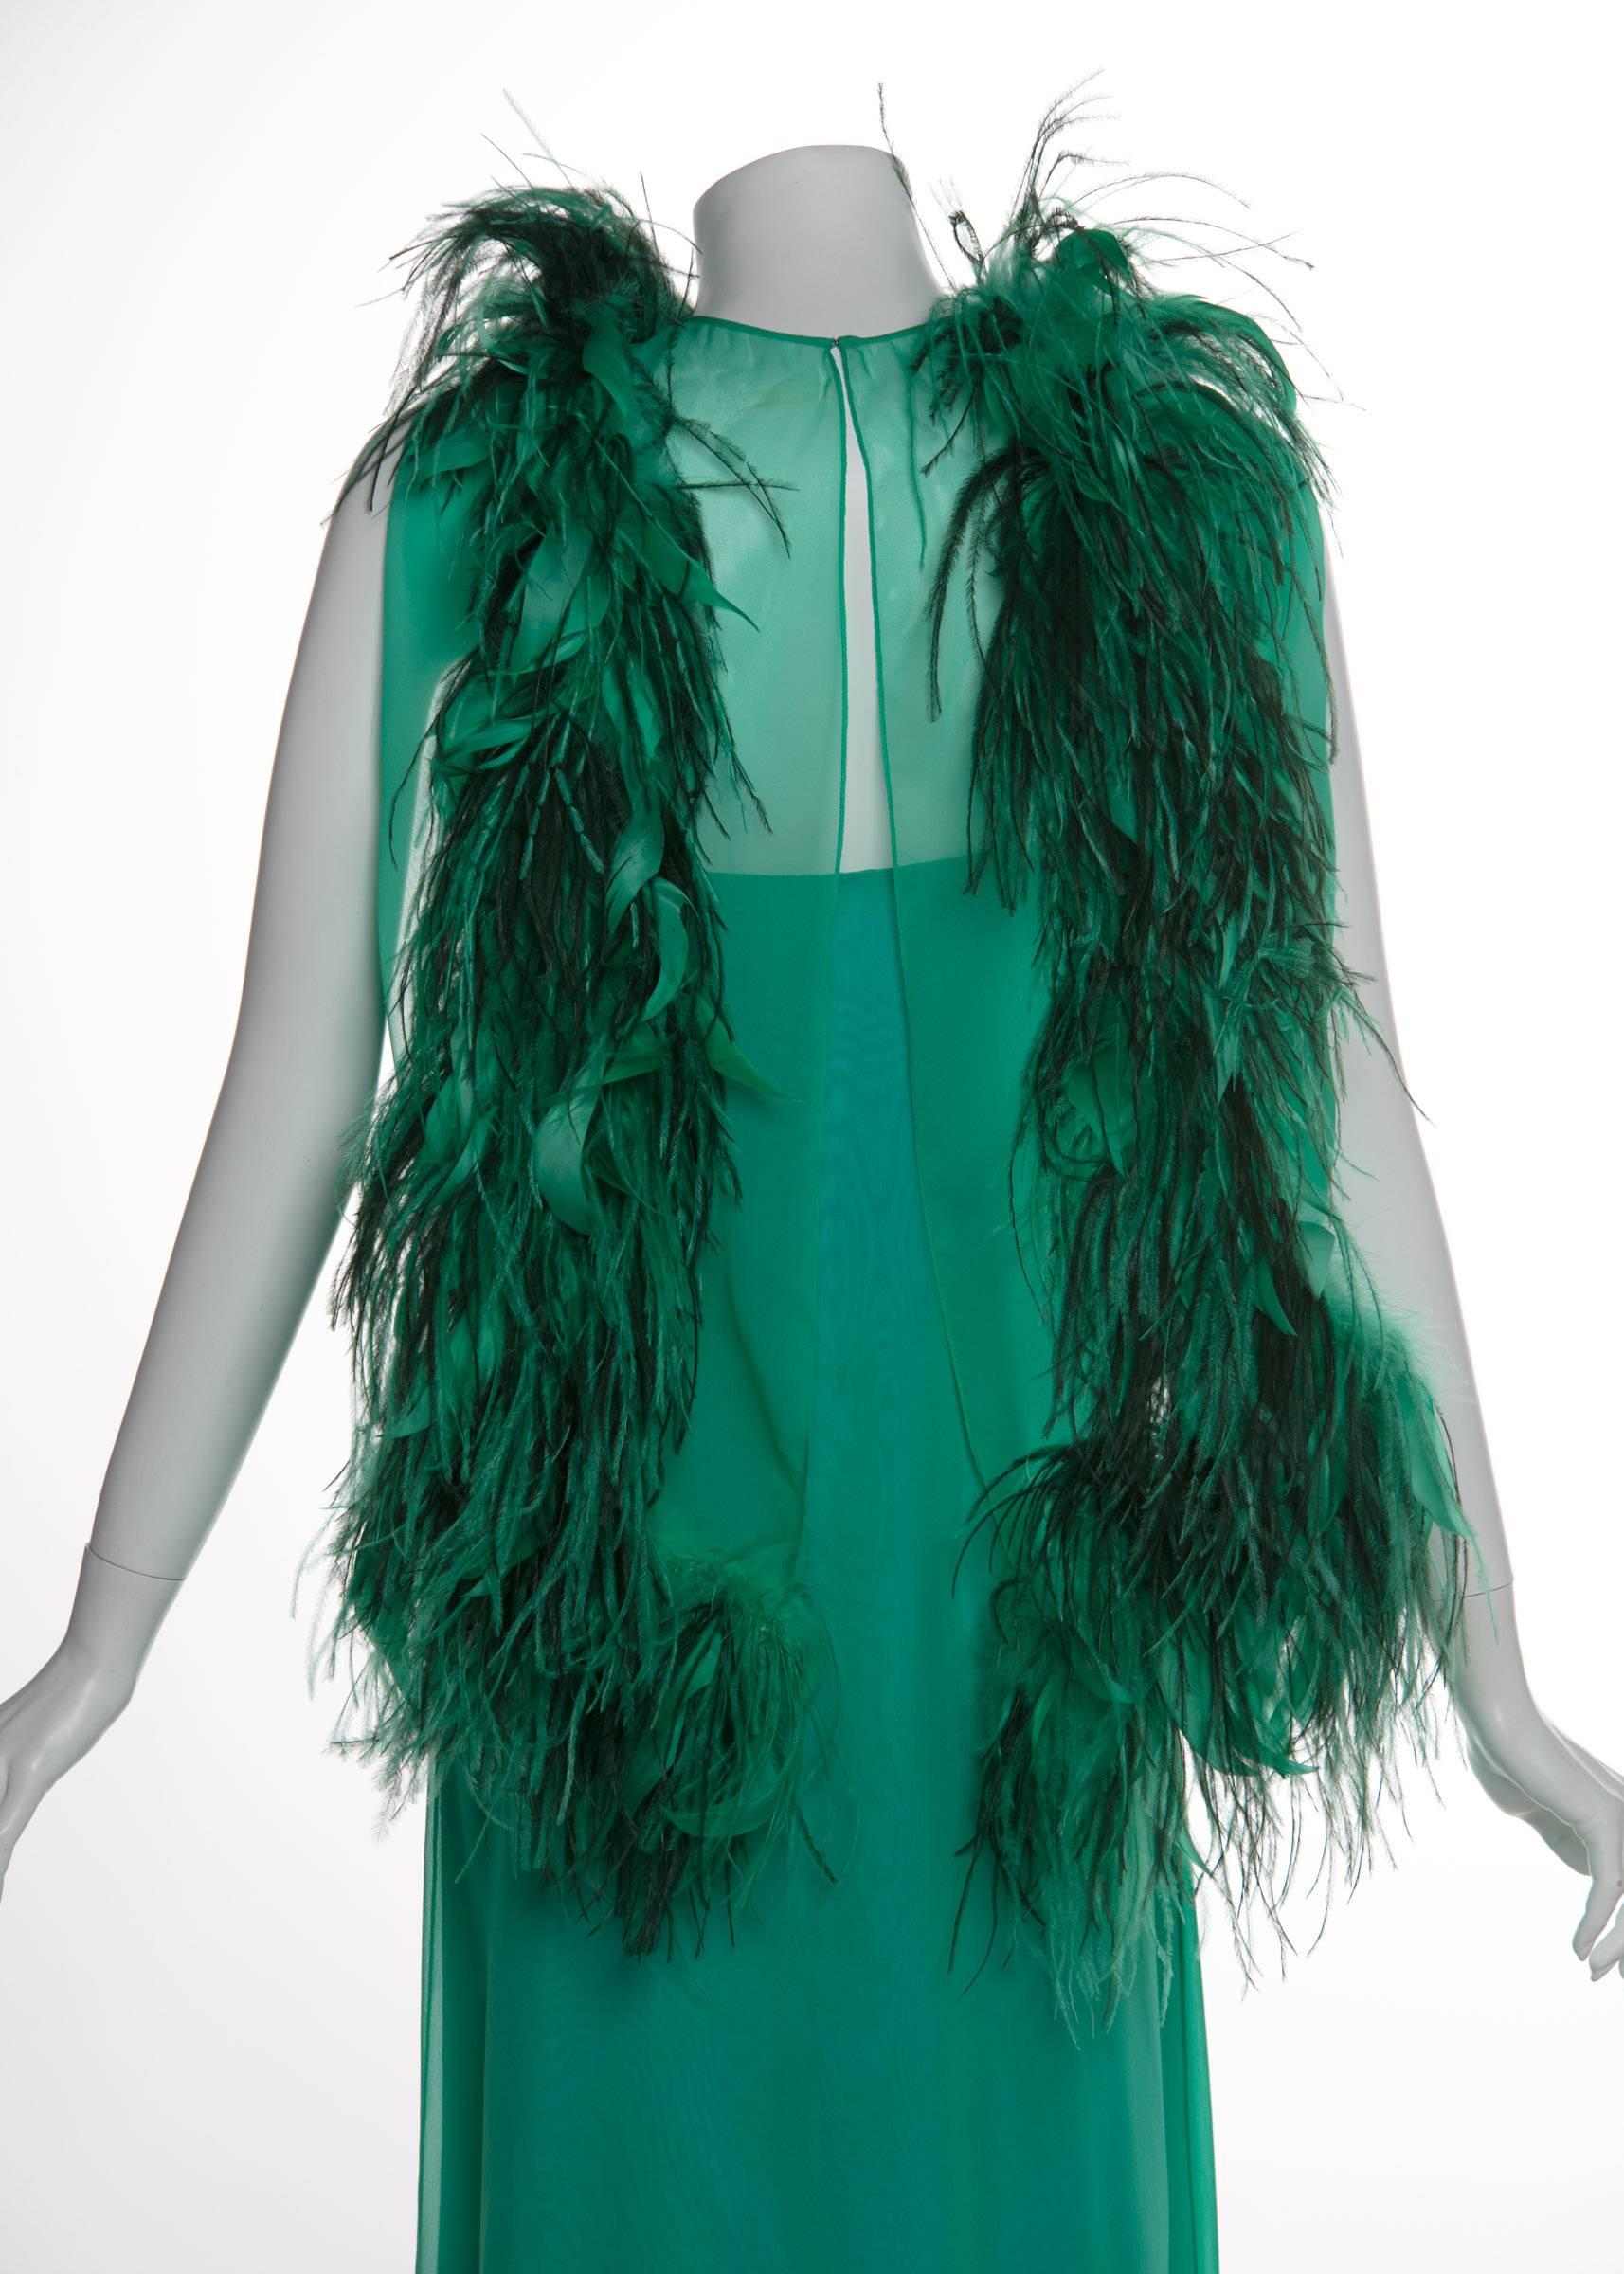 Women's 1970s Malcolm Starr Emerald Green Chiffon Gown & Ostrich Feather Cape Set